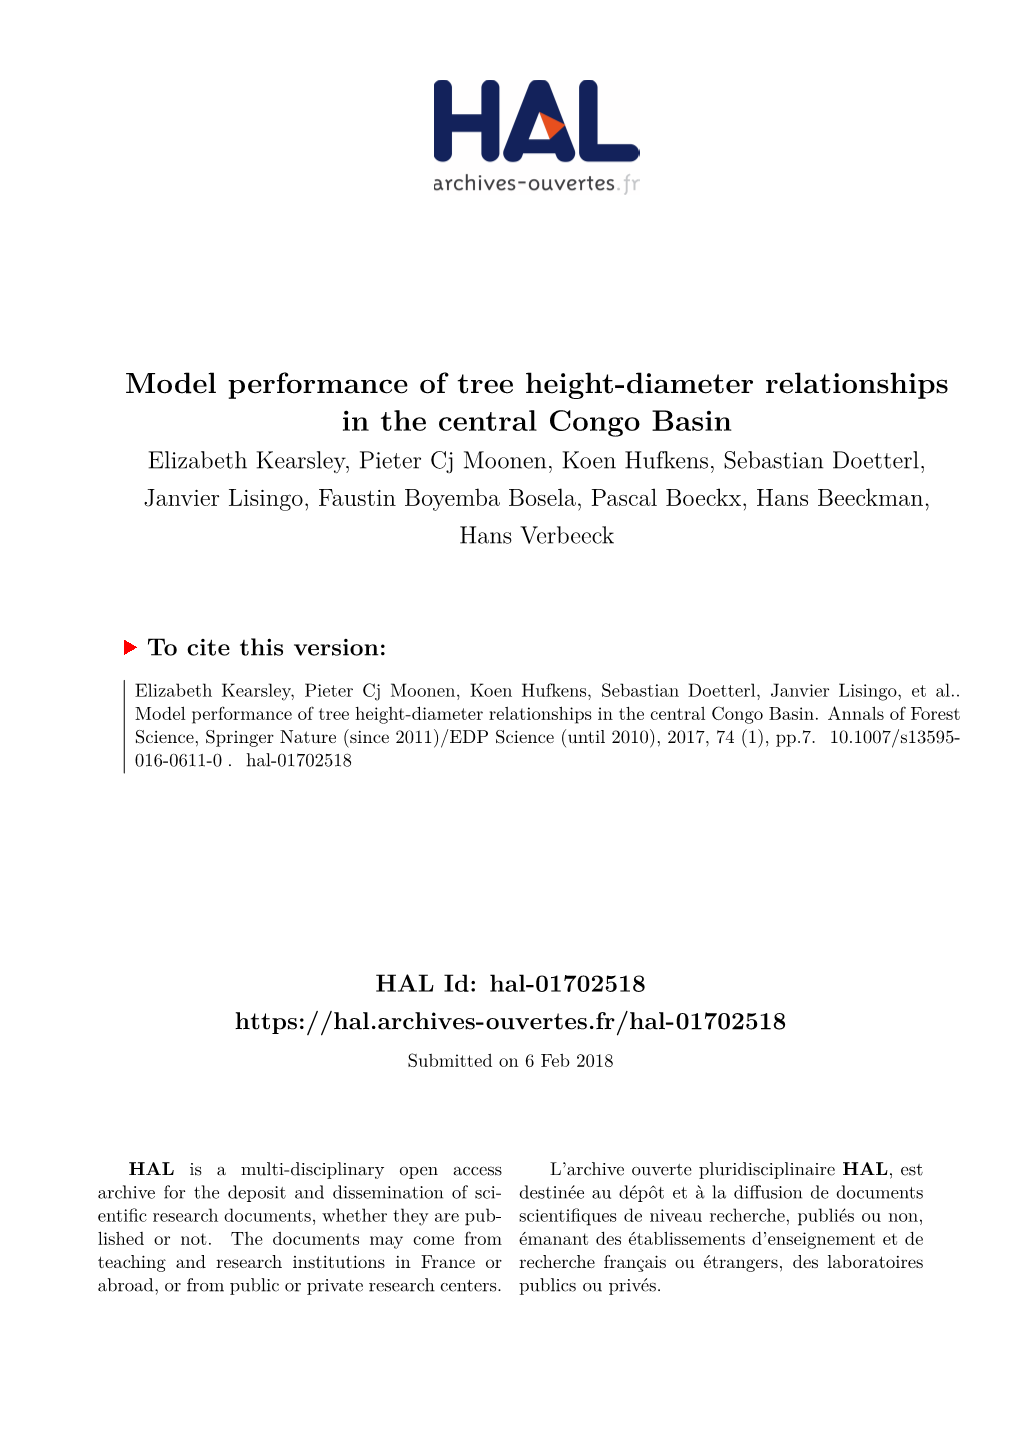 Model Performance of Tree Height-Diameter Relationships in The